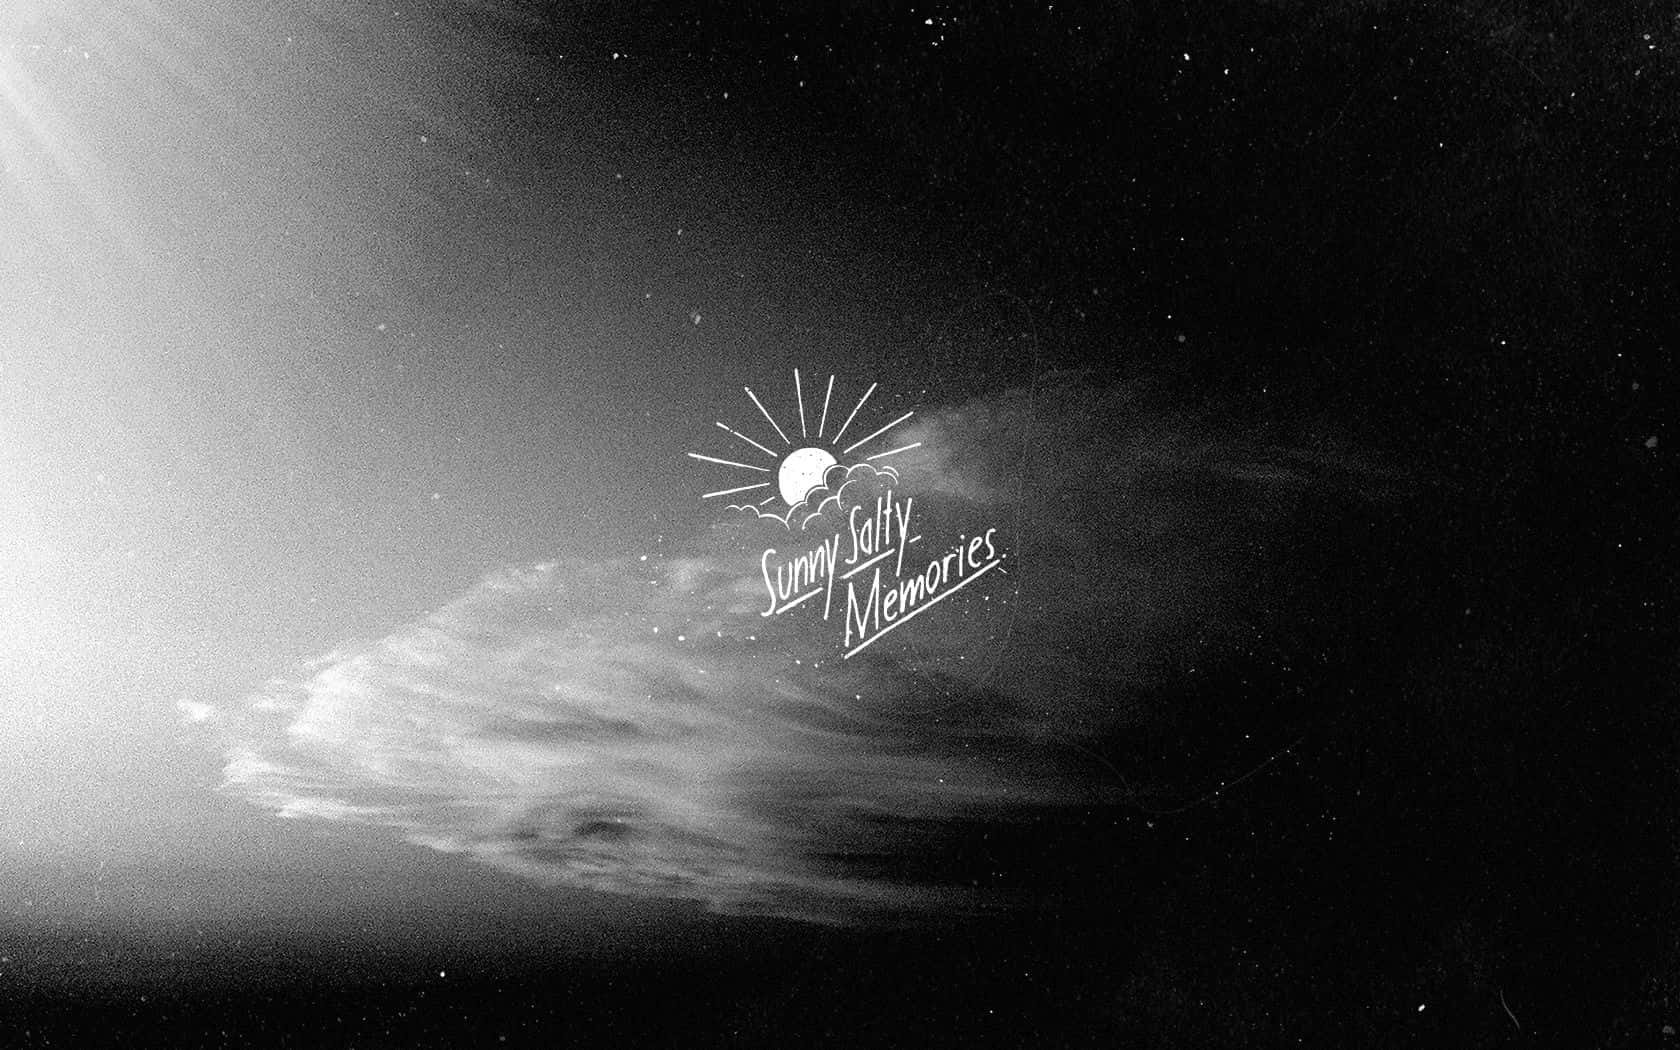 A Black And White Photo Of A Cloud With The Words'sunshine'